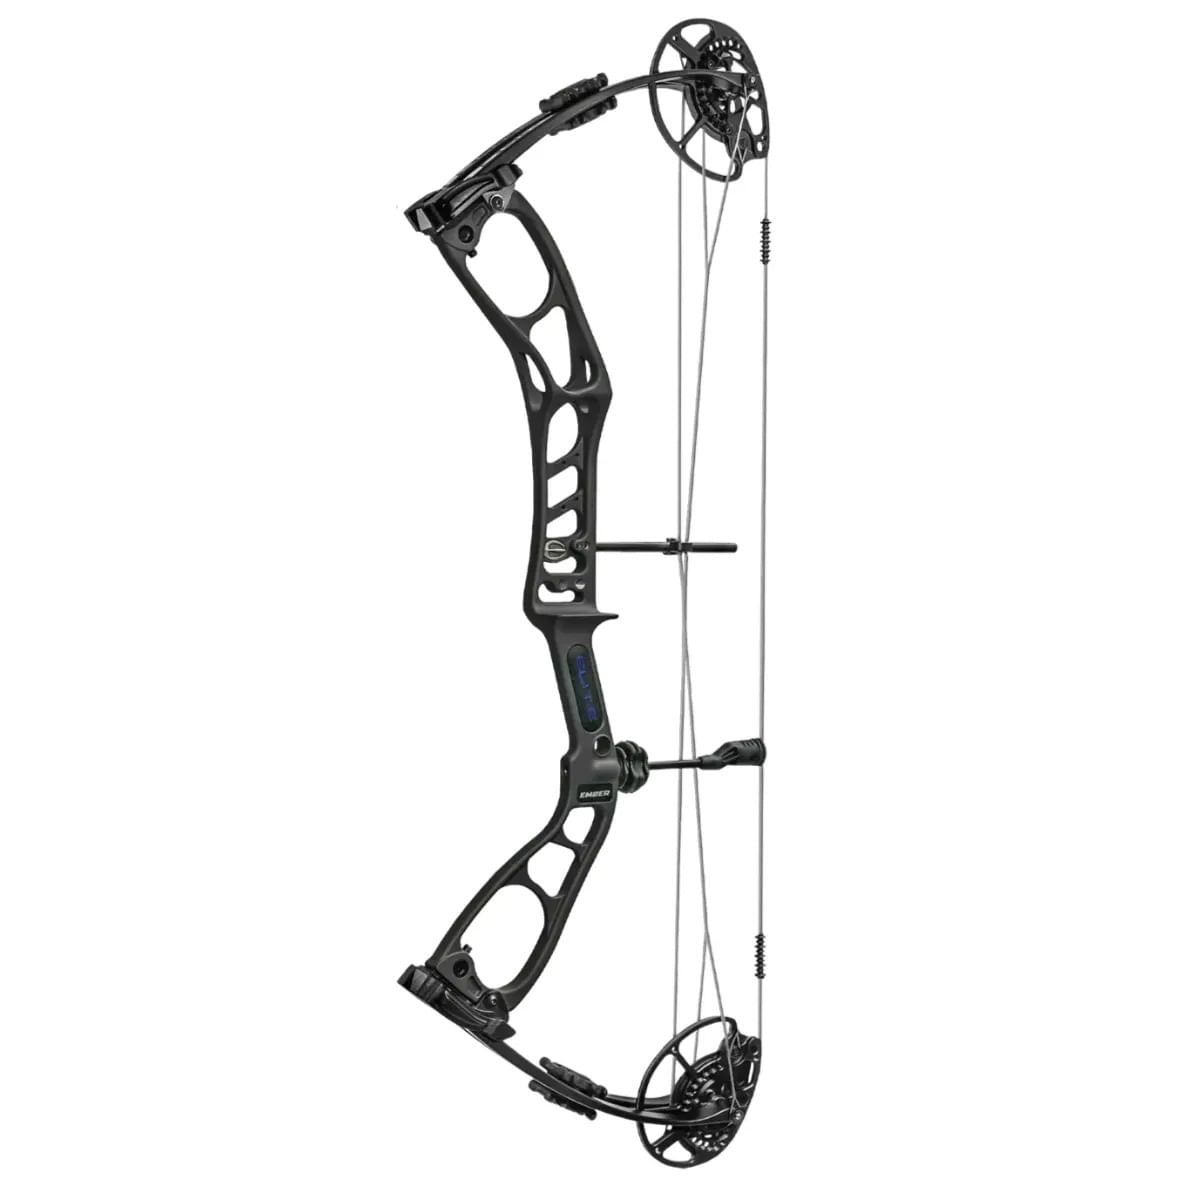 Elite Archery Ember Compound Bow Black 60 lb Right Hand